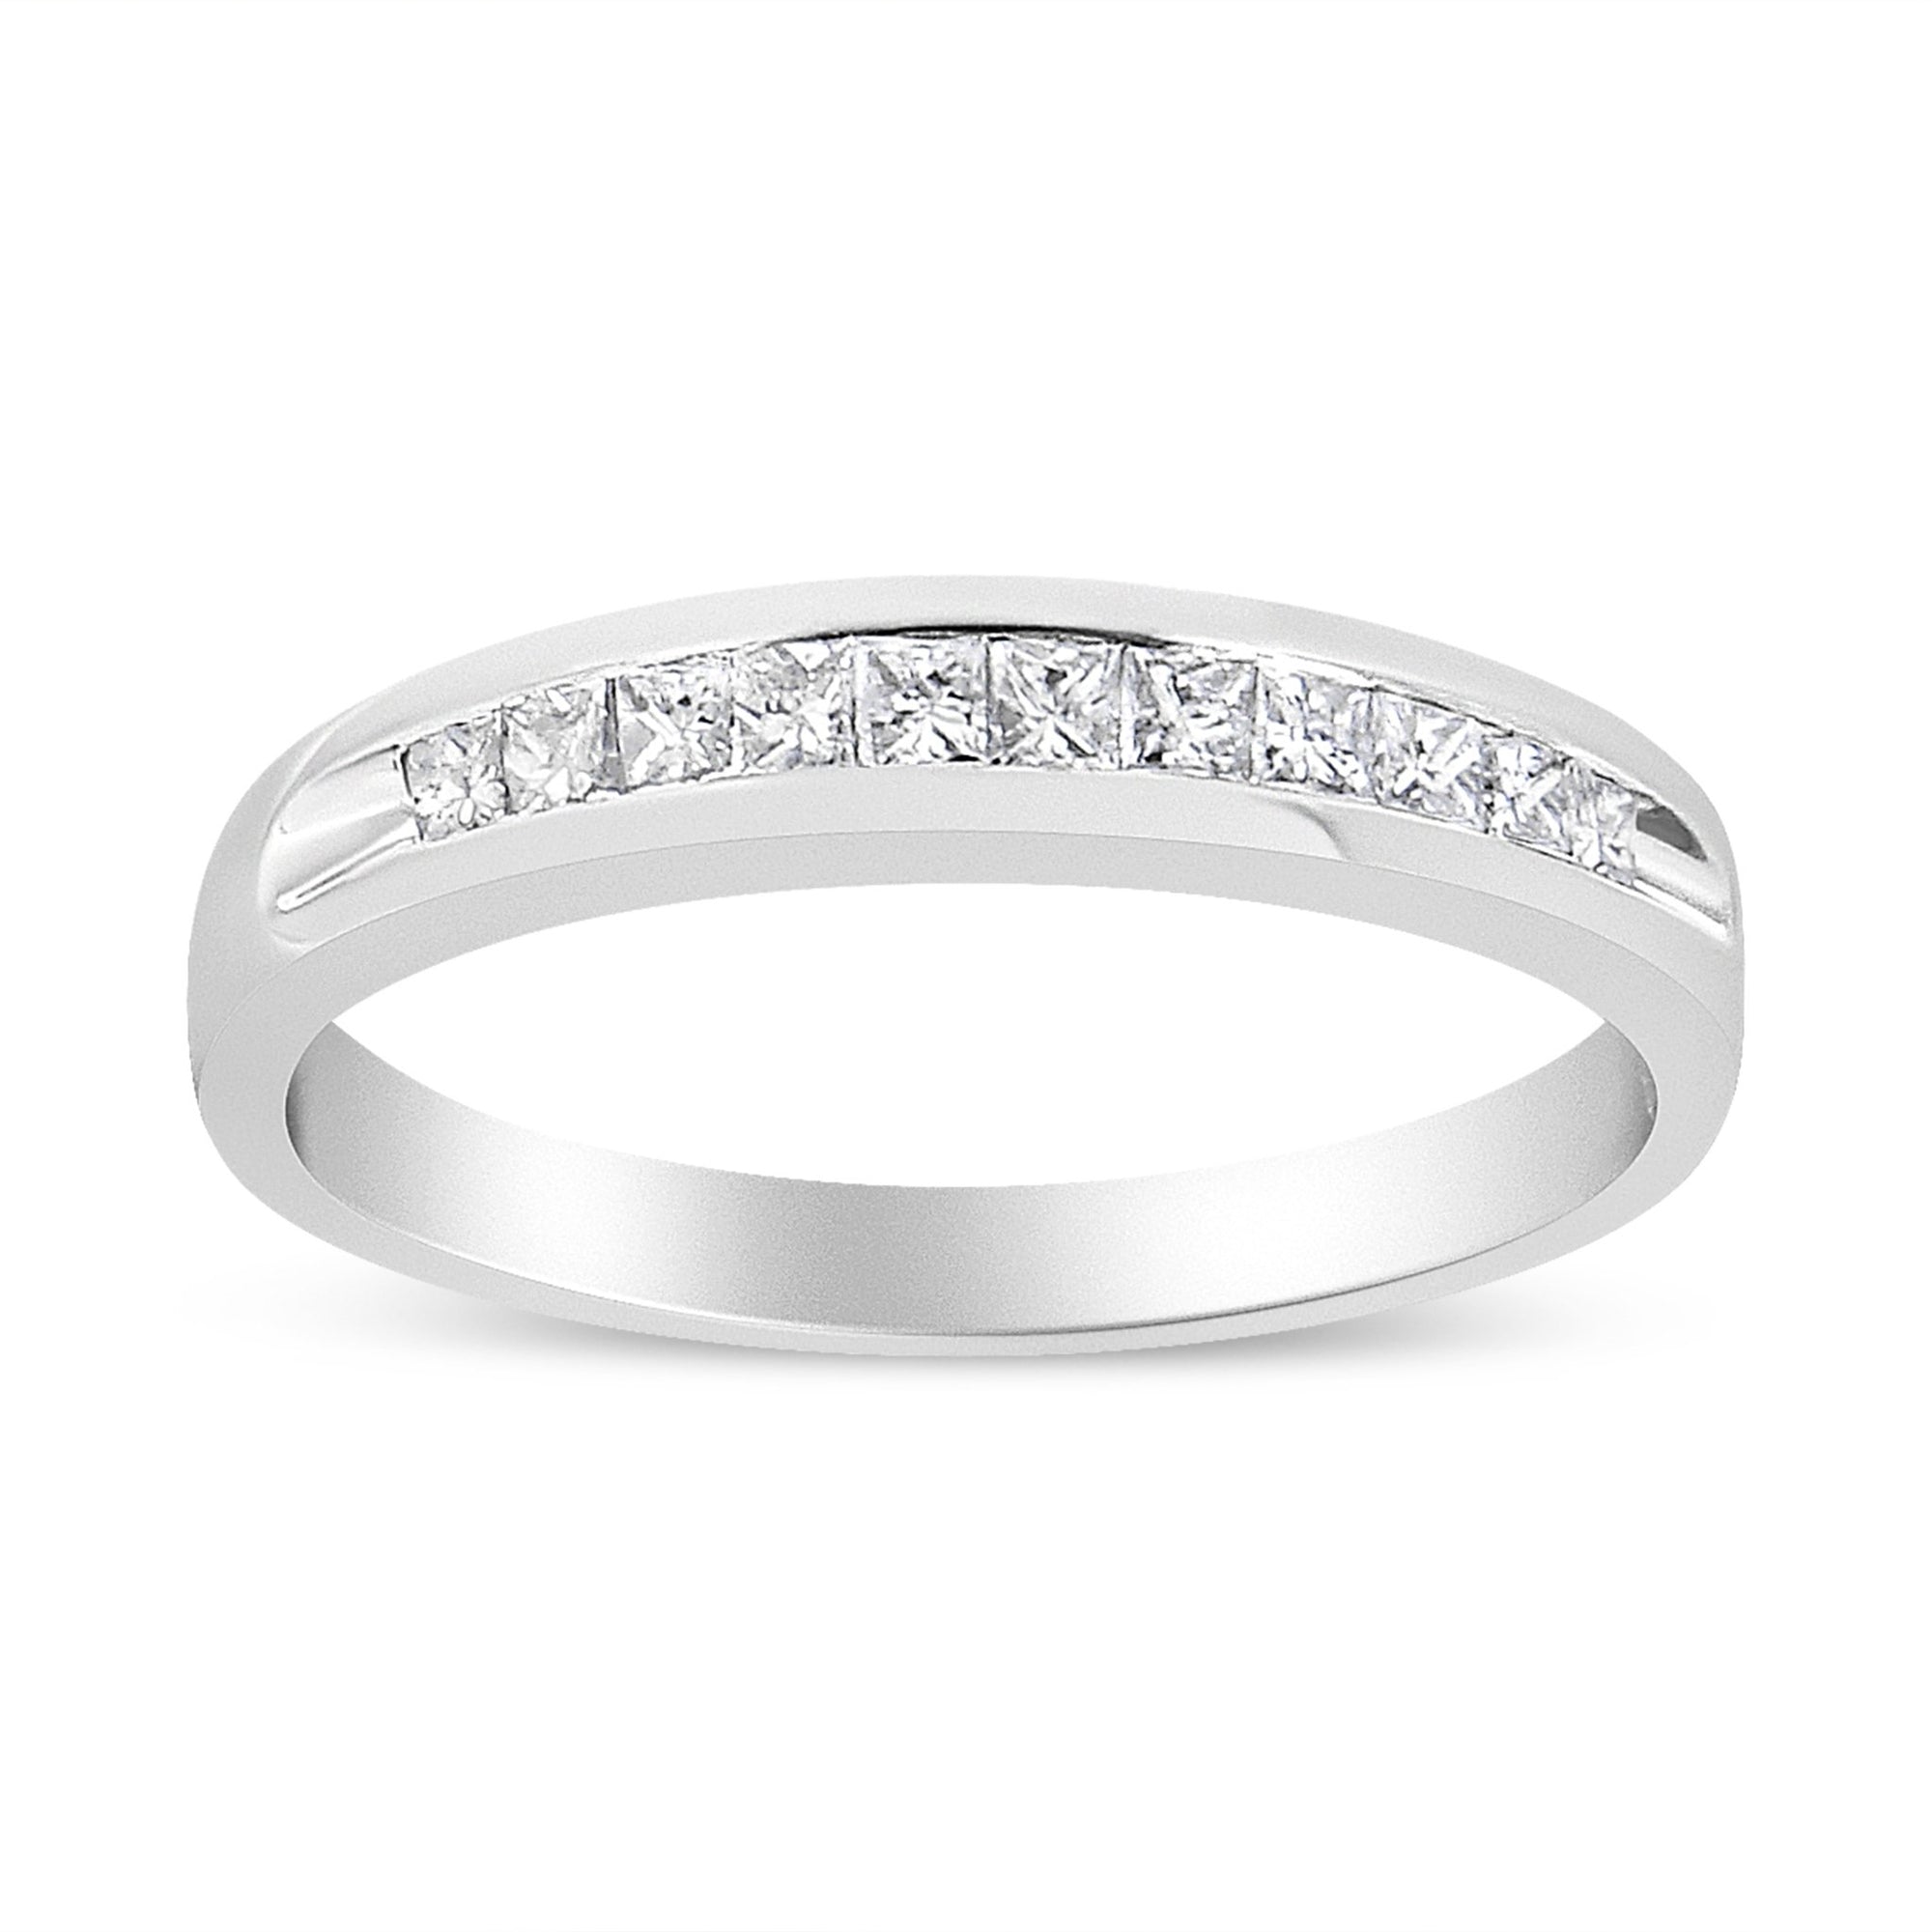 18K White Gold 1/4 Cttw Channel Set Princess-cut Diamond Classic 11 Stone Band Ring (E-F Color, I1-I2 Clarity) - Size 7 - LinkagejewelrydesignLinkagejewelrydesign